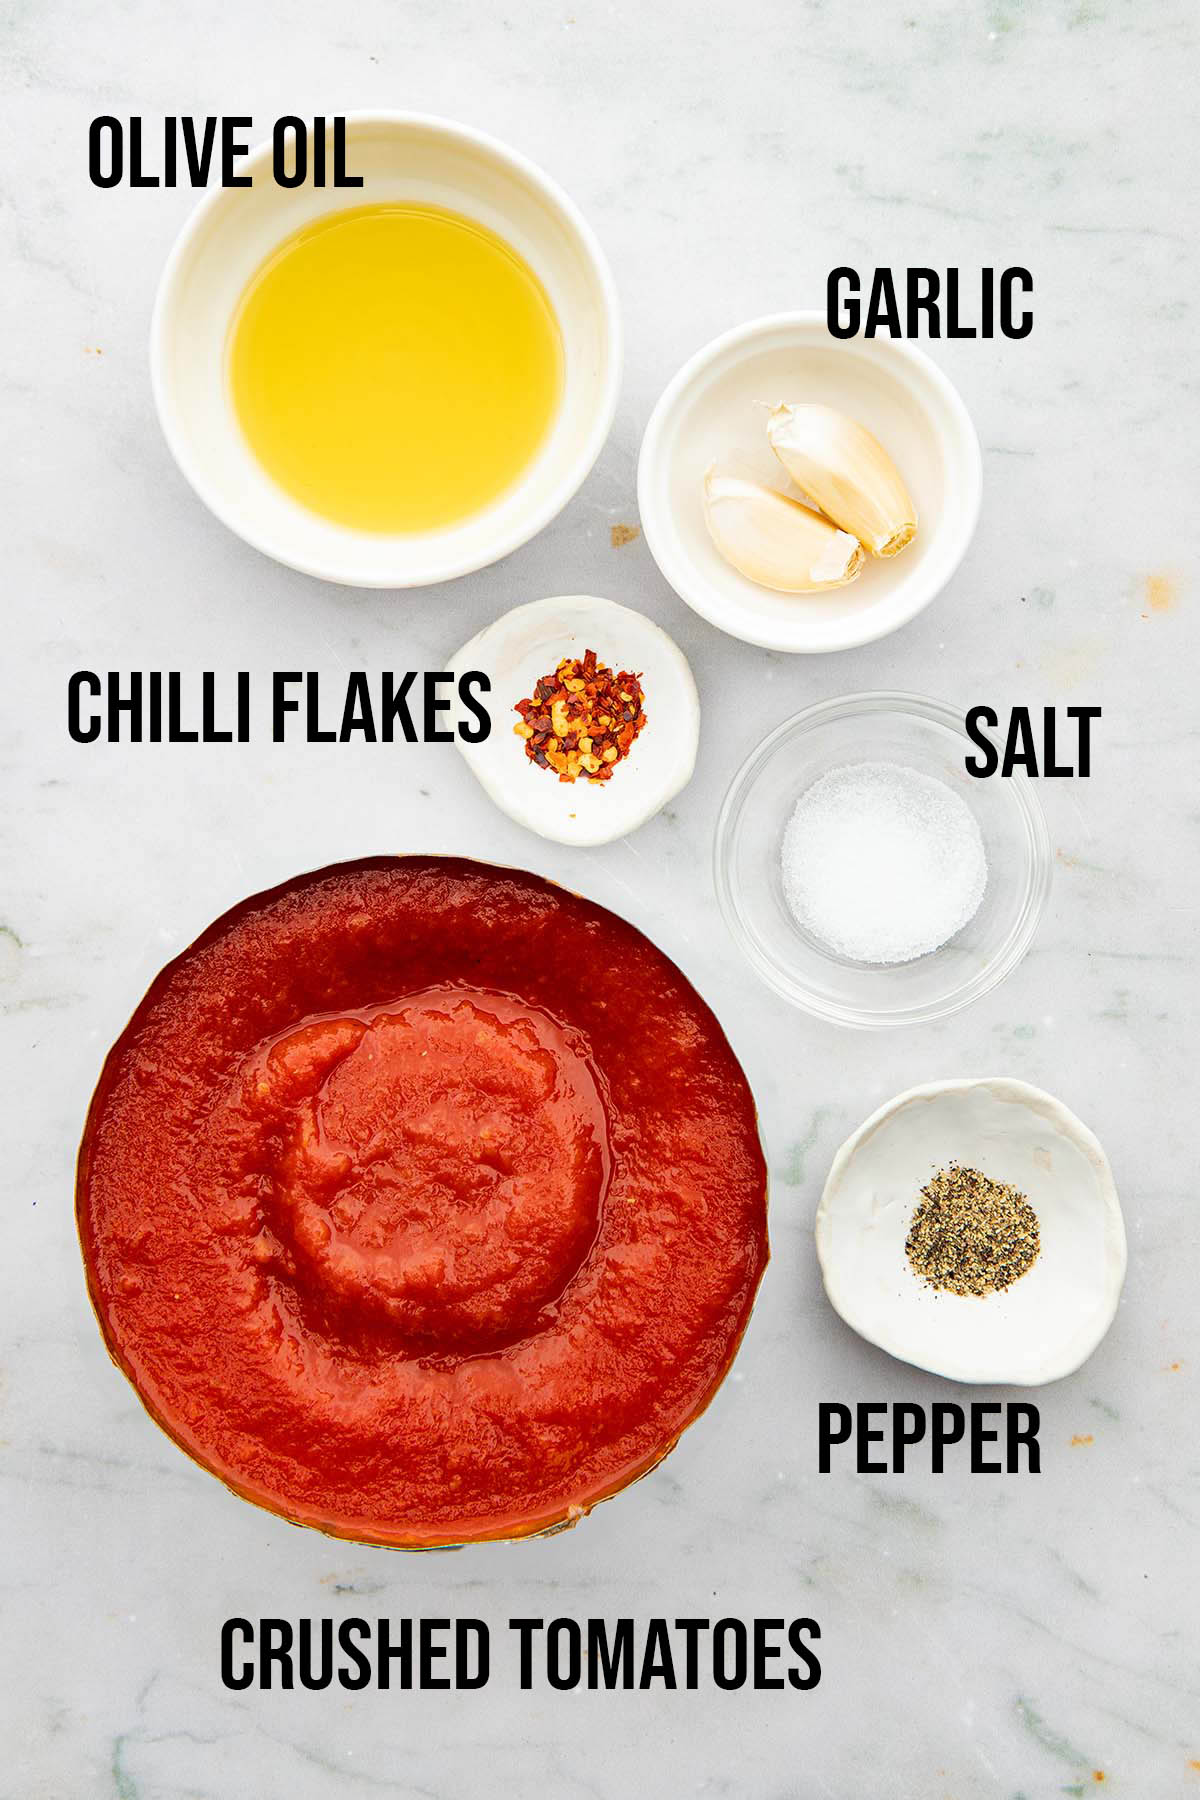 Ingredients to make small batch tomato sauce.